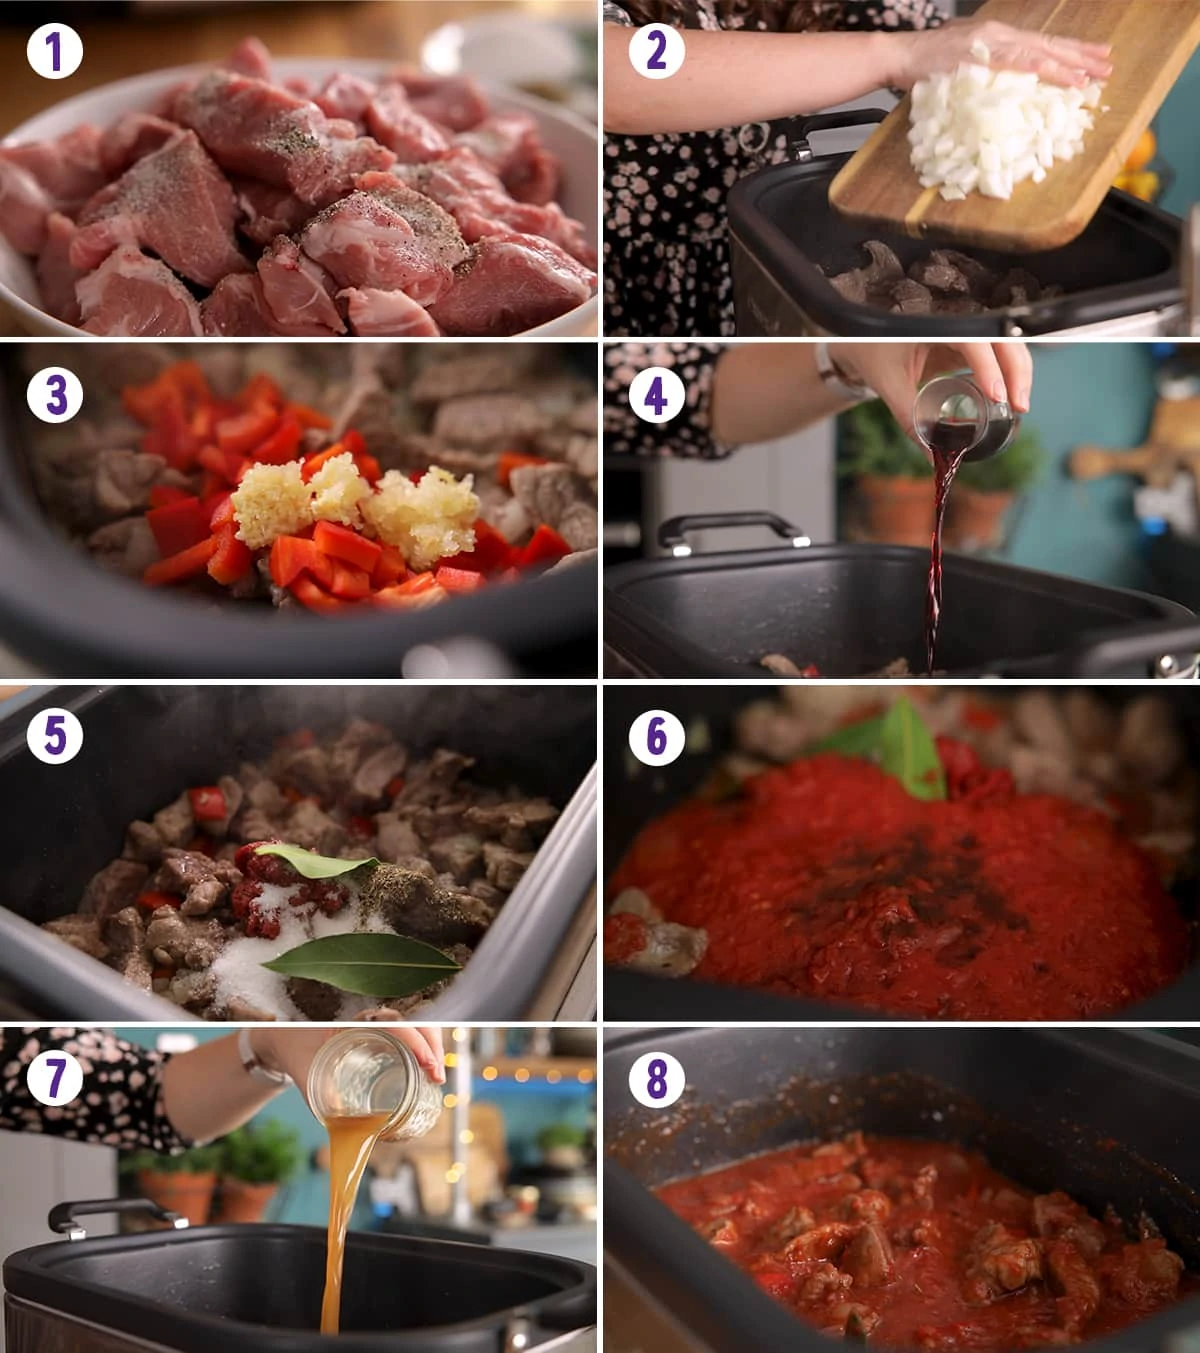 8 image collage showing how to make slow cooked pork ragu